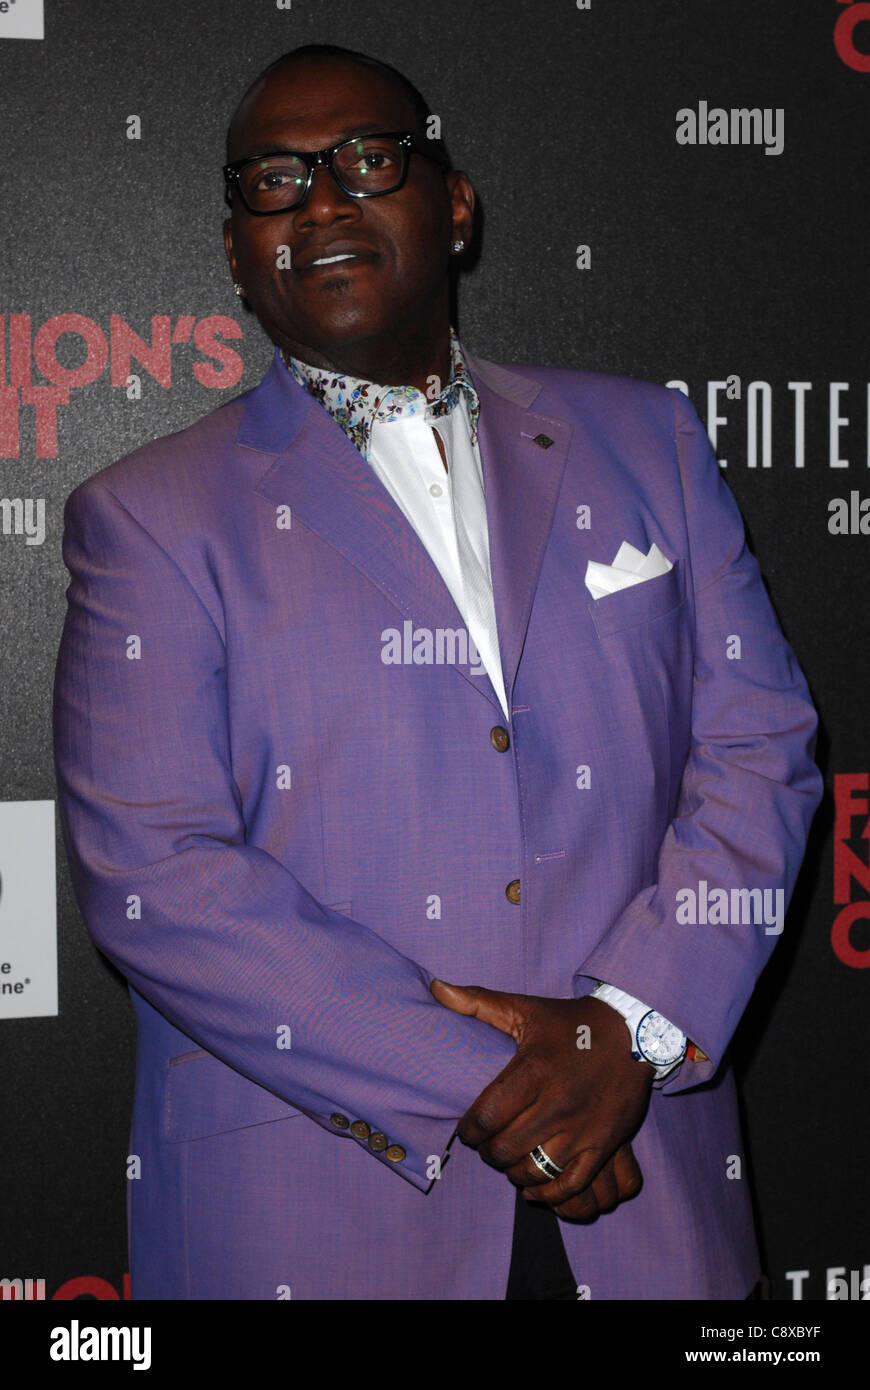 Randy Jackson public appearance Fashion''s Night Out 2011 atBeverly Center Beverly Center Los Angeles CA September 8 2011 Photo Stock Photo